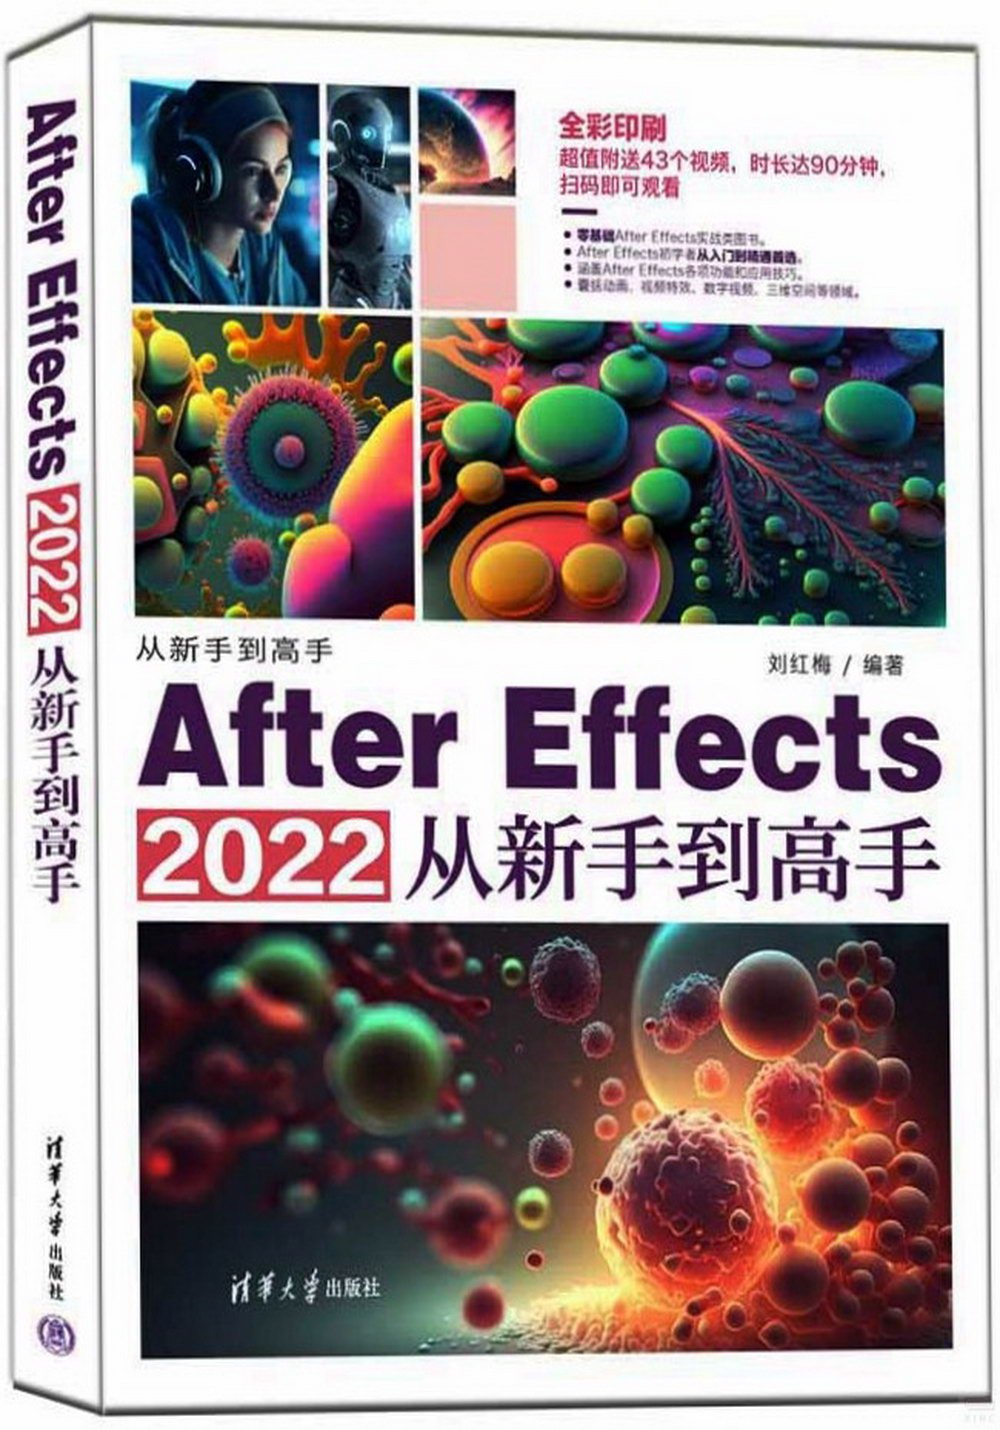 After Effects 2022從新手到高手